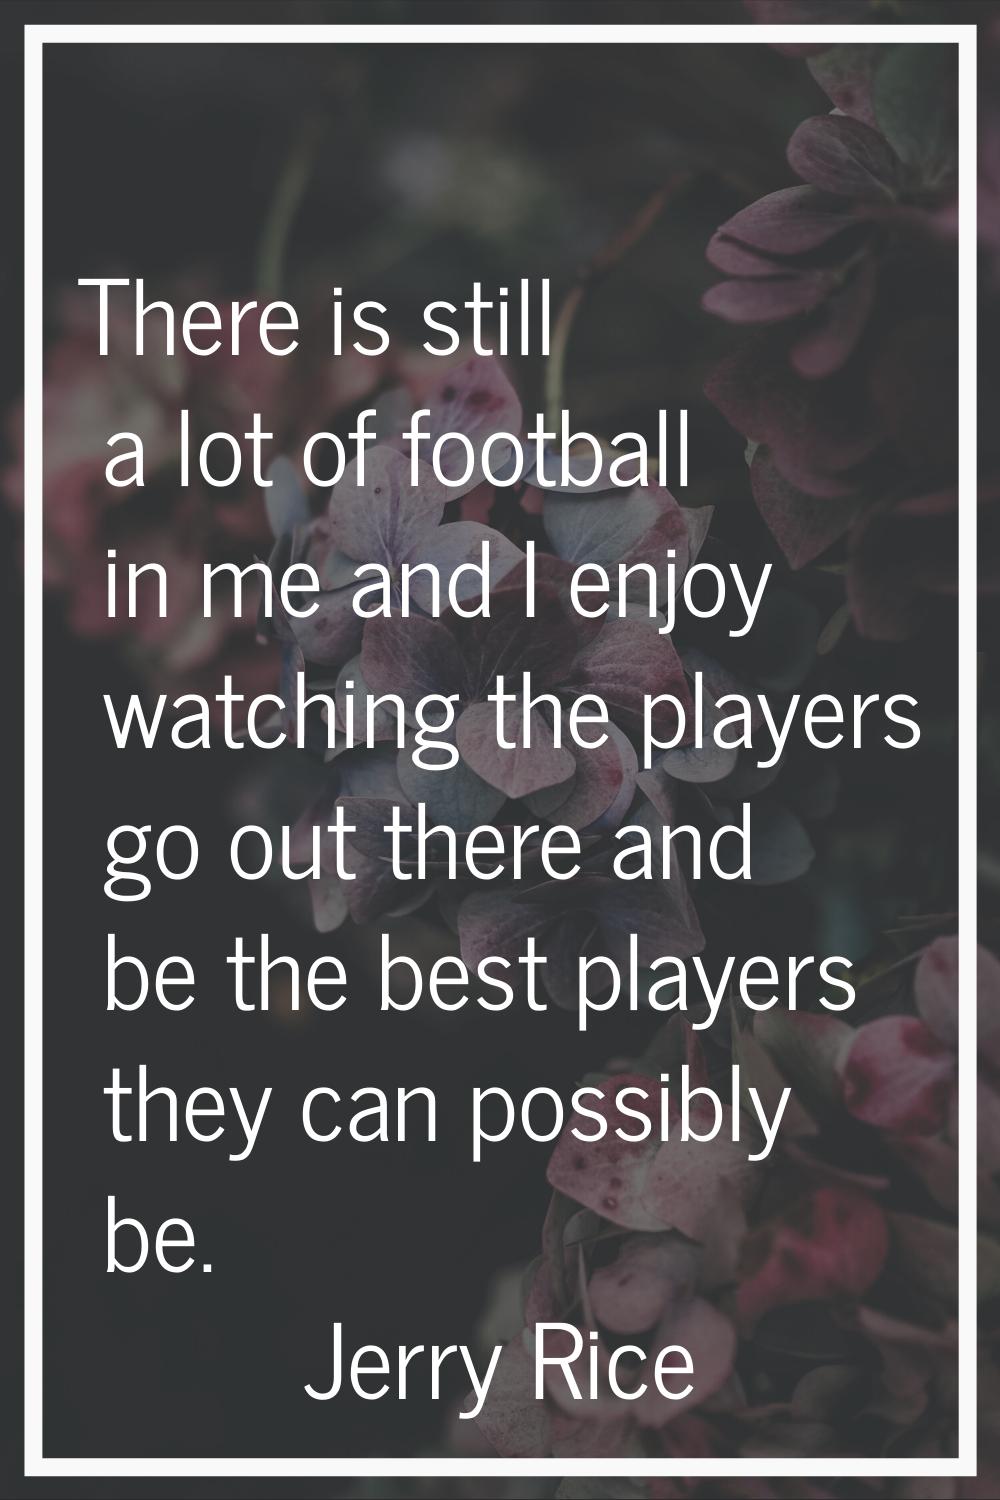 There is still a lot of football in me and I enjoy watching the players go out there and be the bes